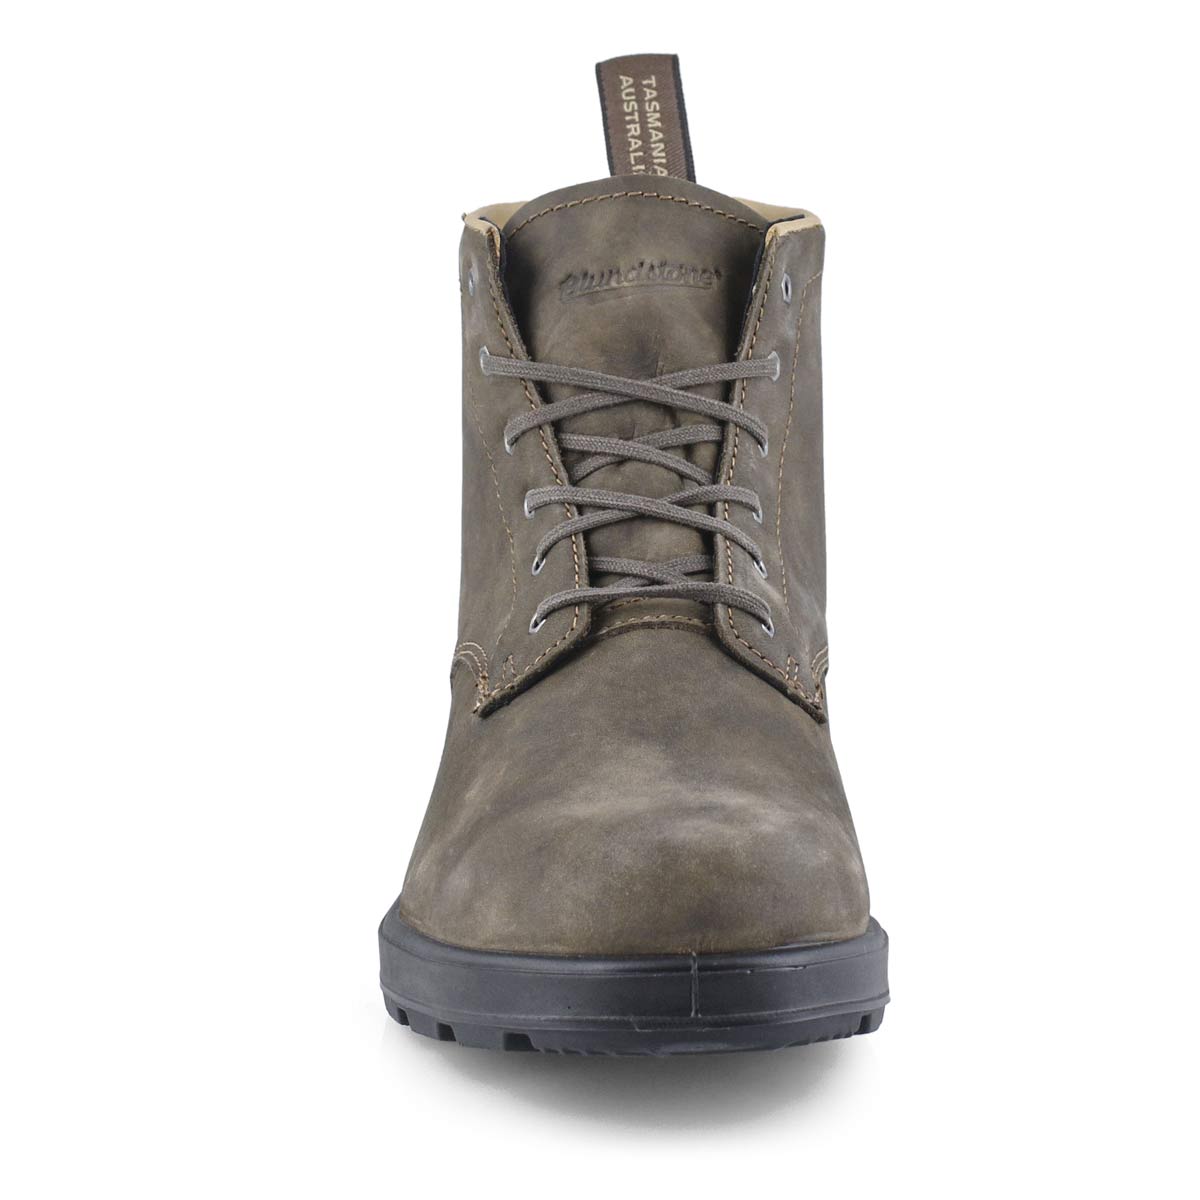 blundstone lace up rustic brown